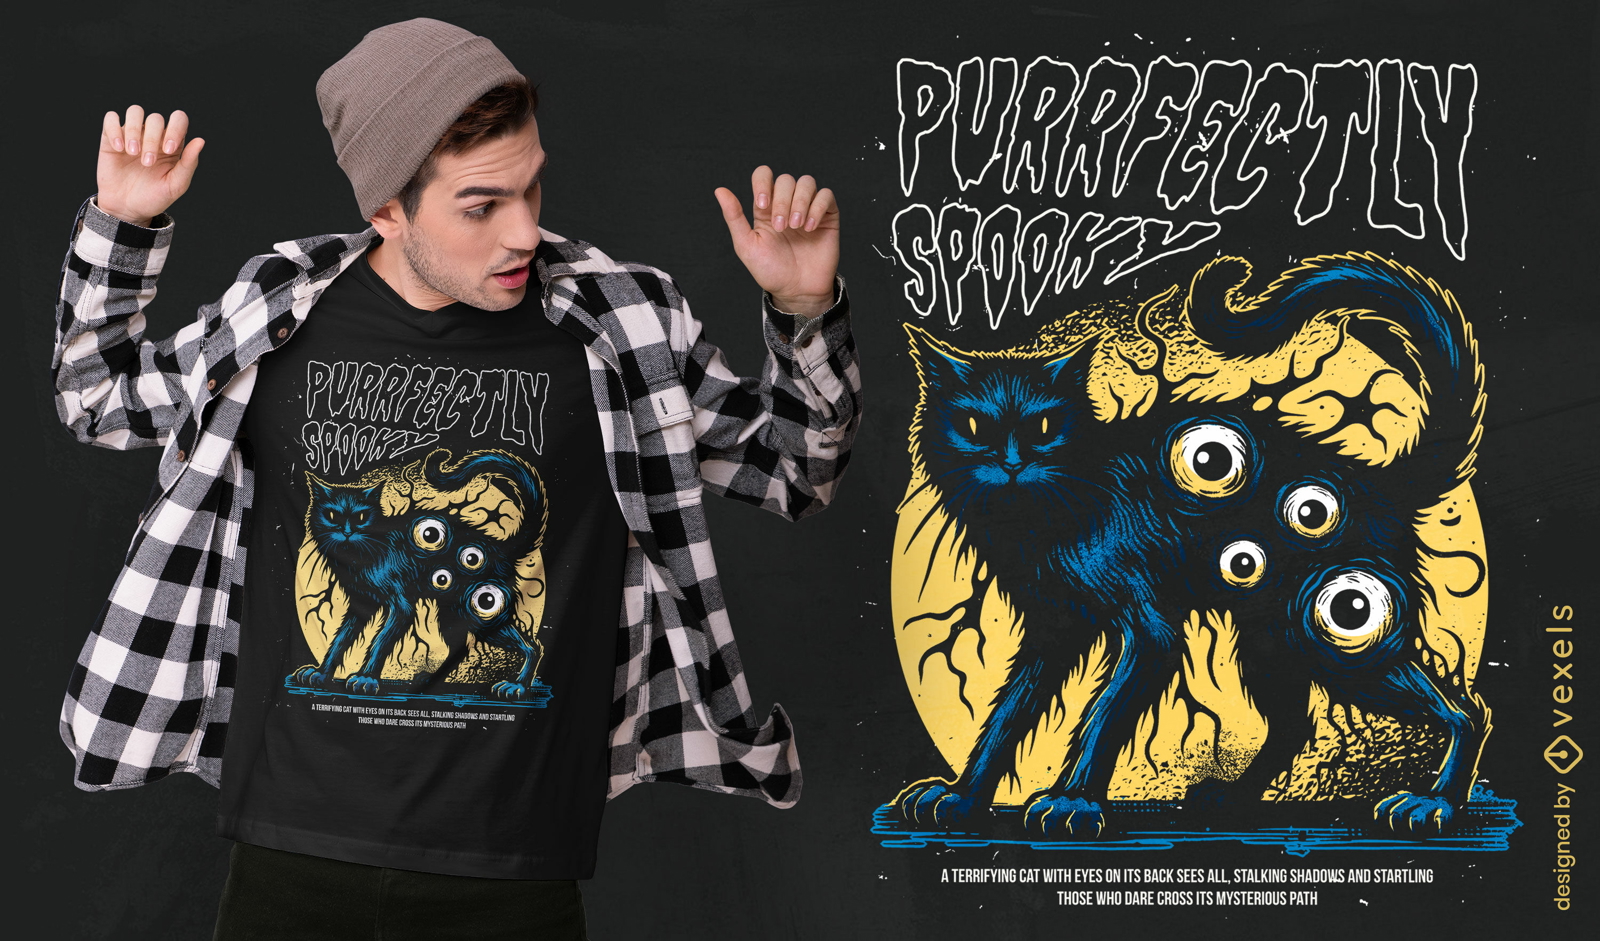 Purrfectly spooky multi-eyed cat t-shirt design